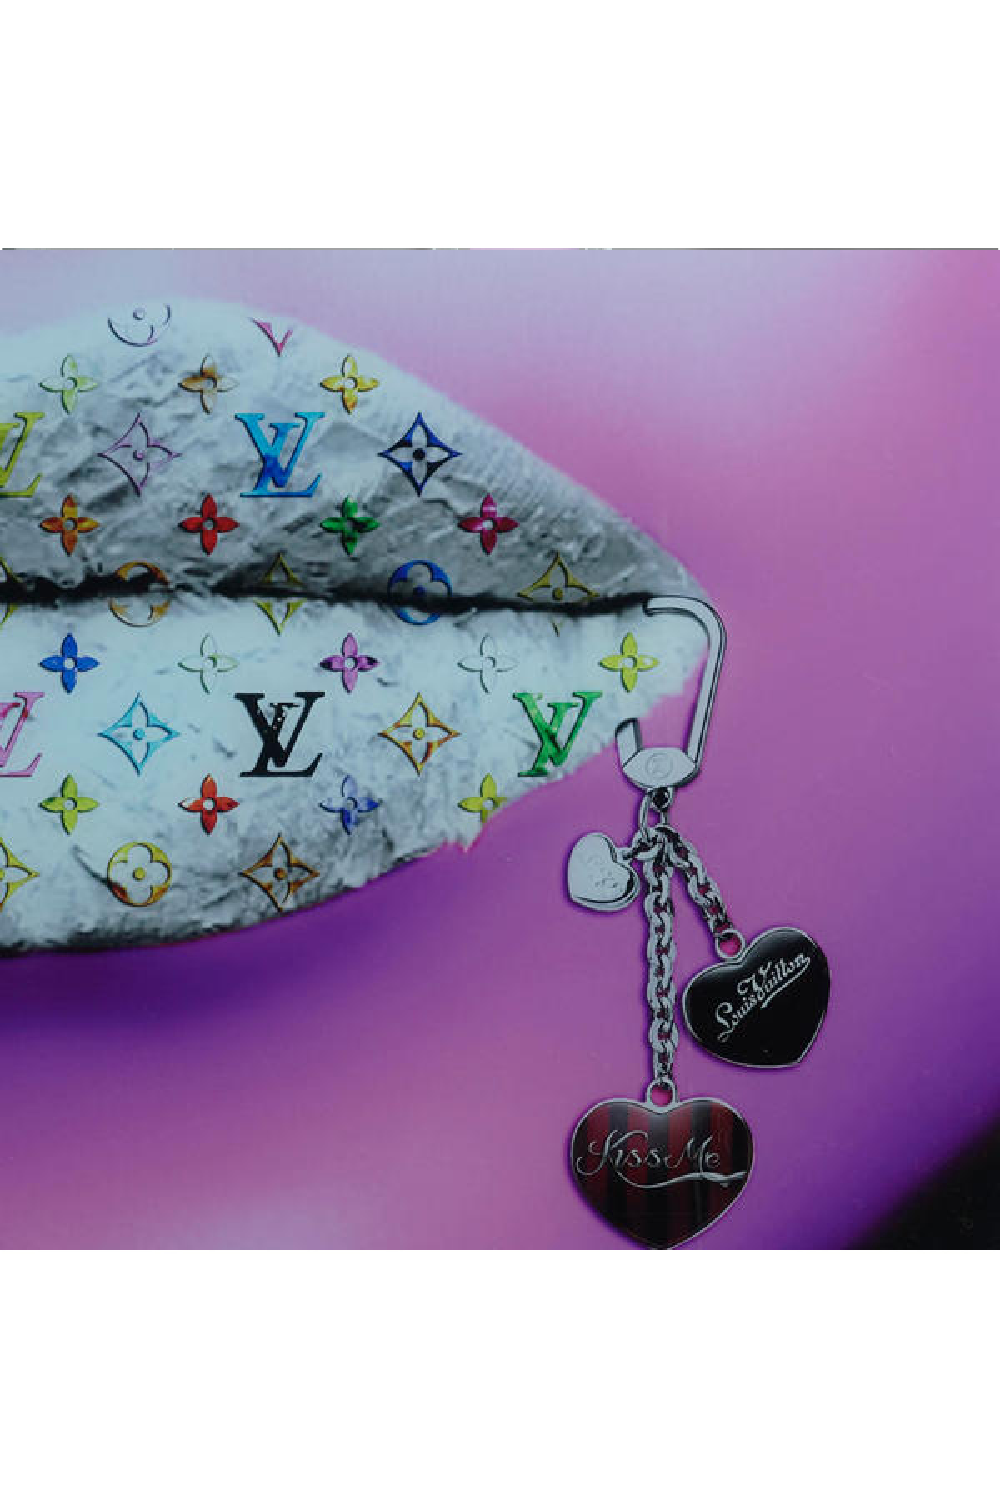 louis vuitton purple and pink